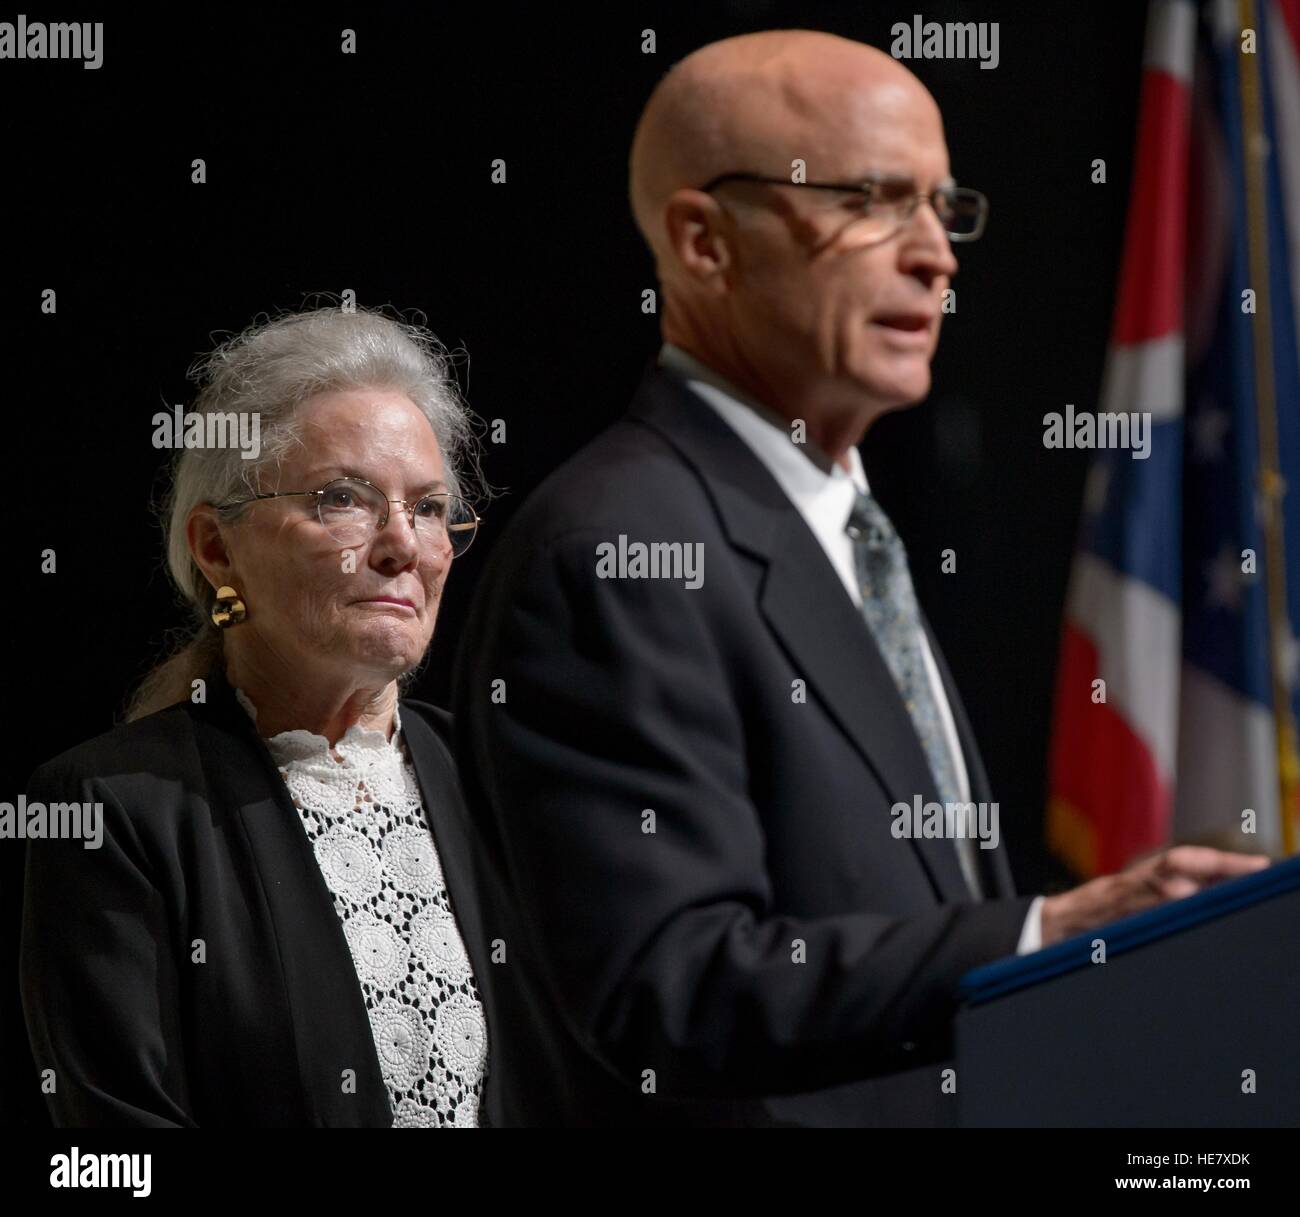 David Glenn, son of former astronaut and U.S. Senator John Glenn, speaks about his father, as his sister Lyn looks on during memorial service at Ohio State University December 17, 2016 in Columbus, Ohio. The former Marine pilot, Senator and first man to orbit the earth died last week at the age of 95. Stock Photo